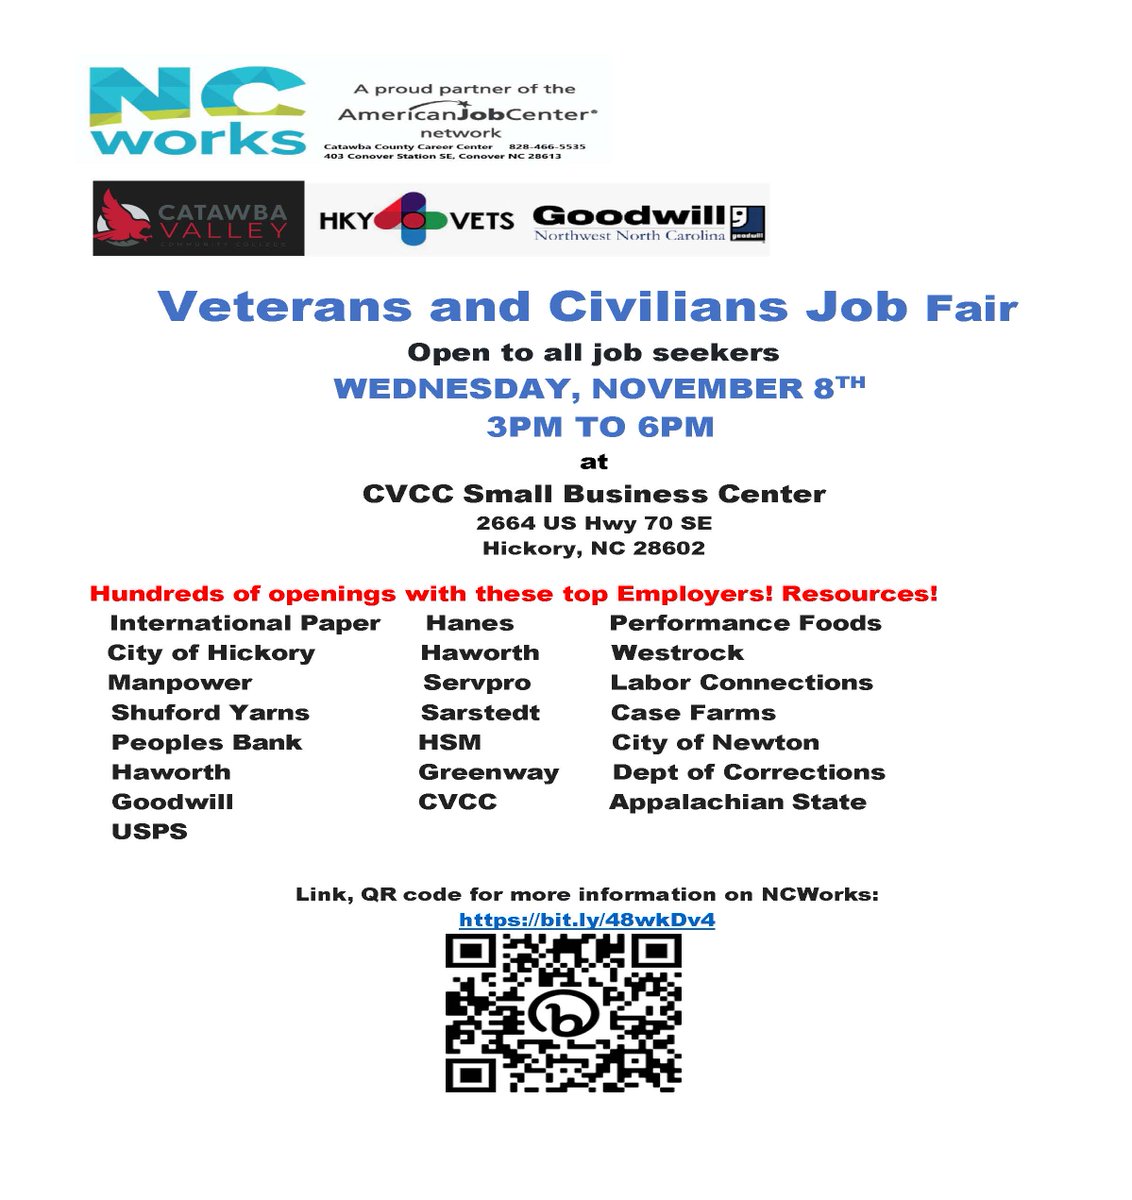 Call all Veterans and job seekers! The Veterans & Civilian Job Fair is happening on Wednesday, November 8th from 3pm to 6pm. See the event flyer for more details. #NCWorks #westernpiedmontworks